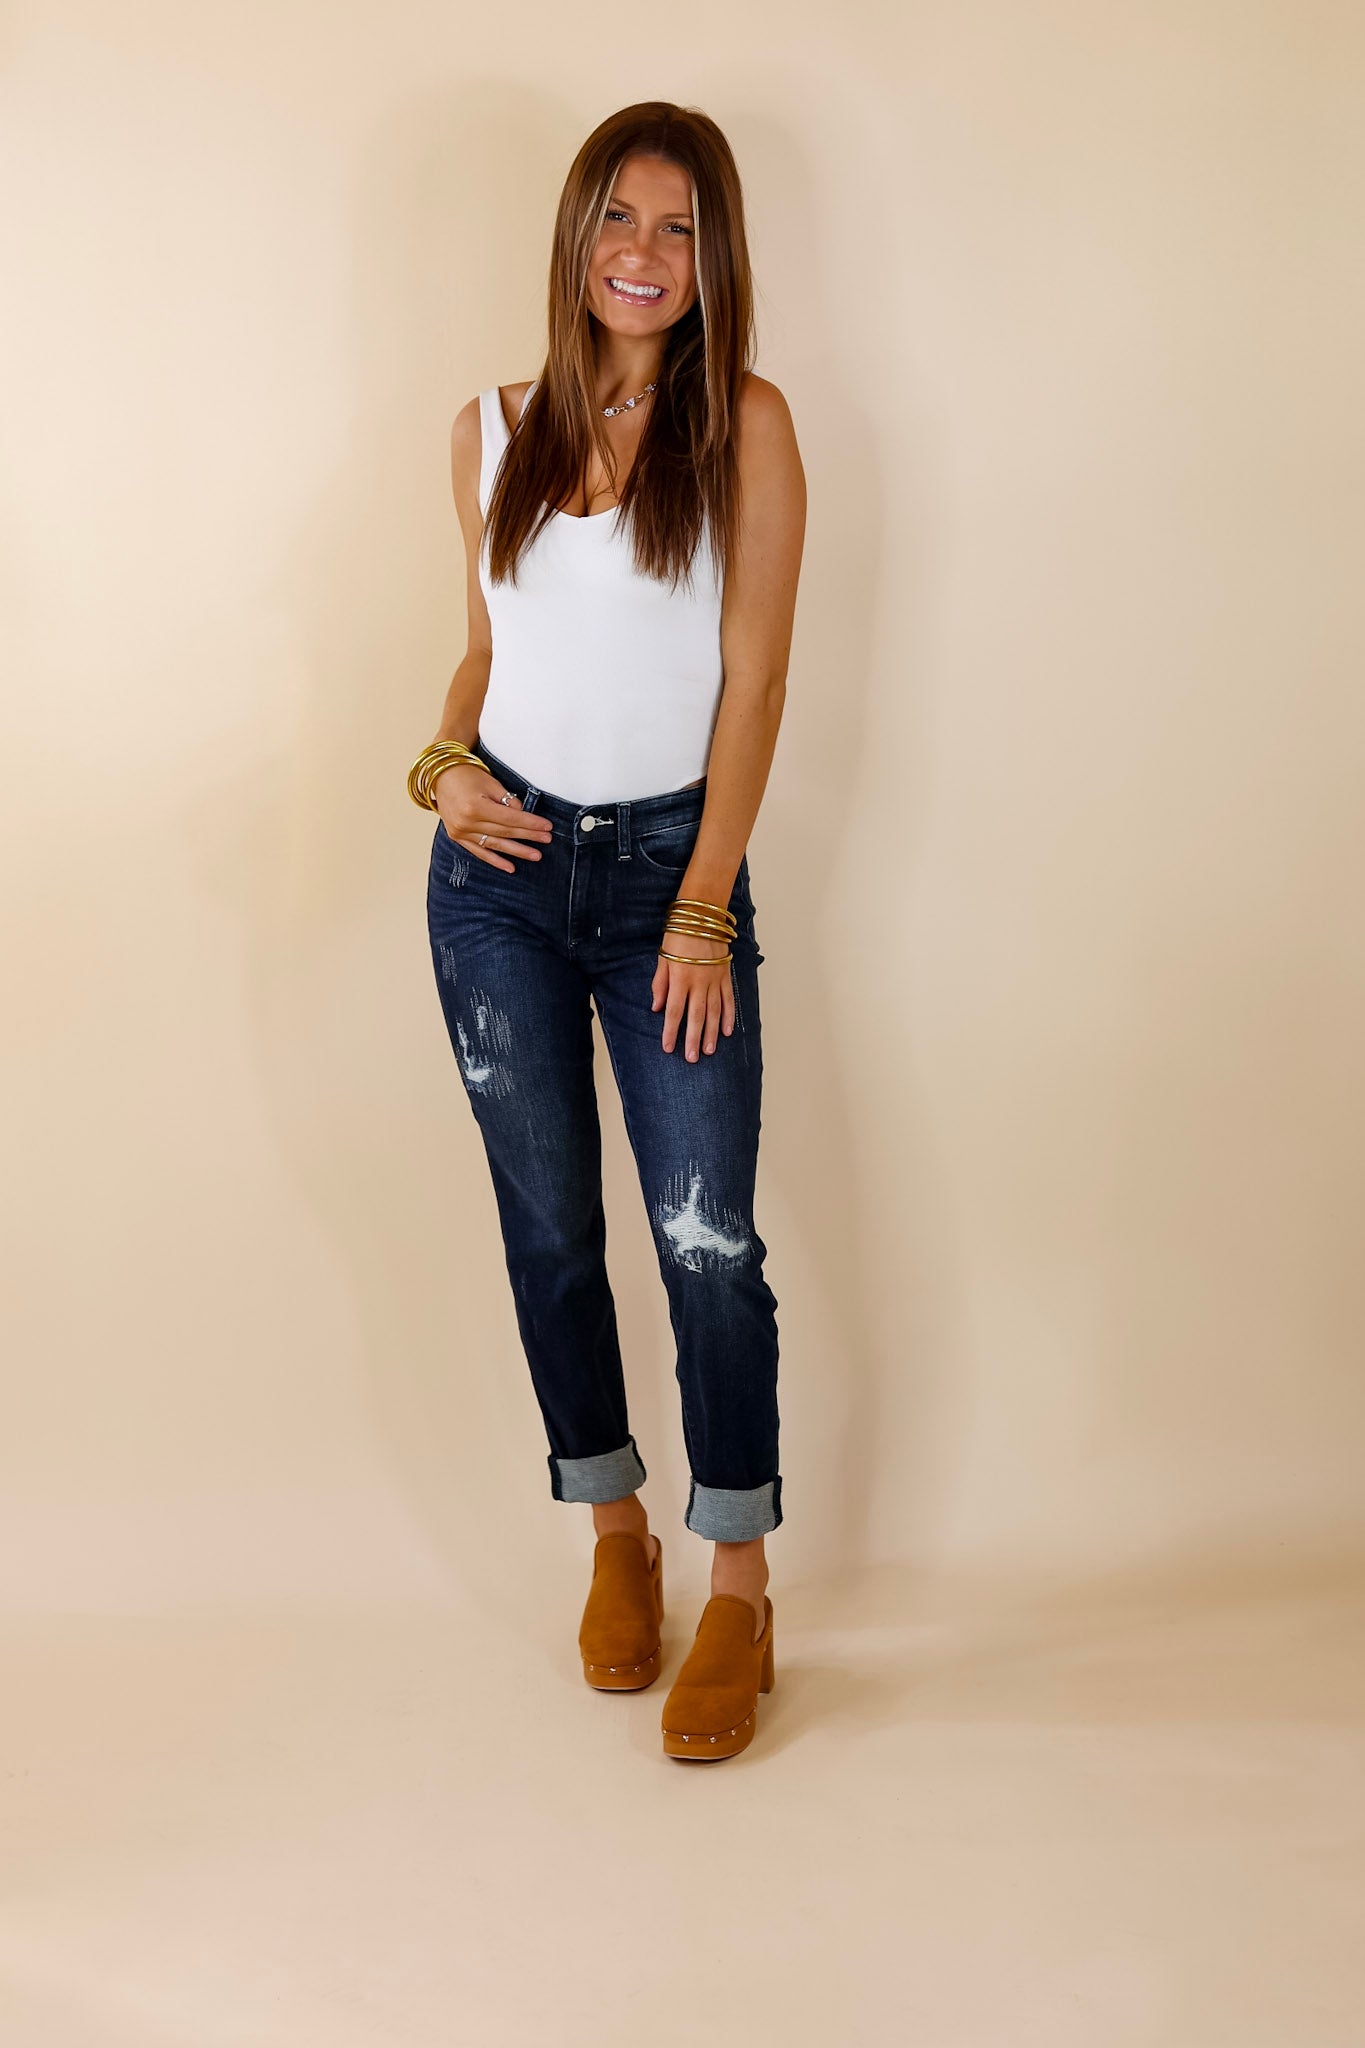 Judy Blue | Cute Energy Cuffed Jeans with Distressed Stitching in Dark Wash - Giddy Up Glamour Boutique